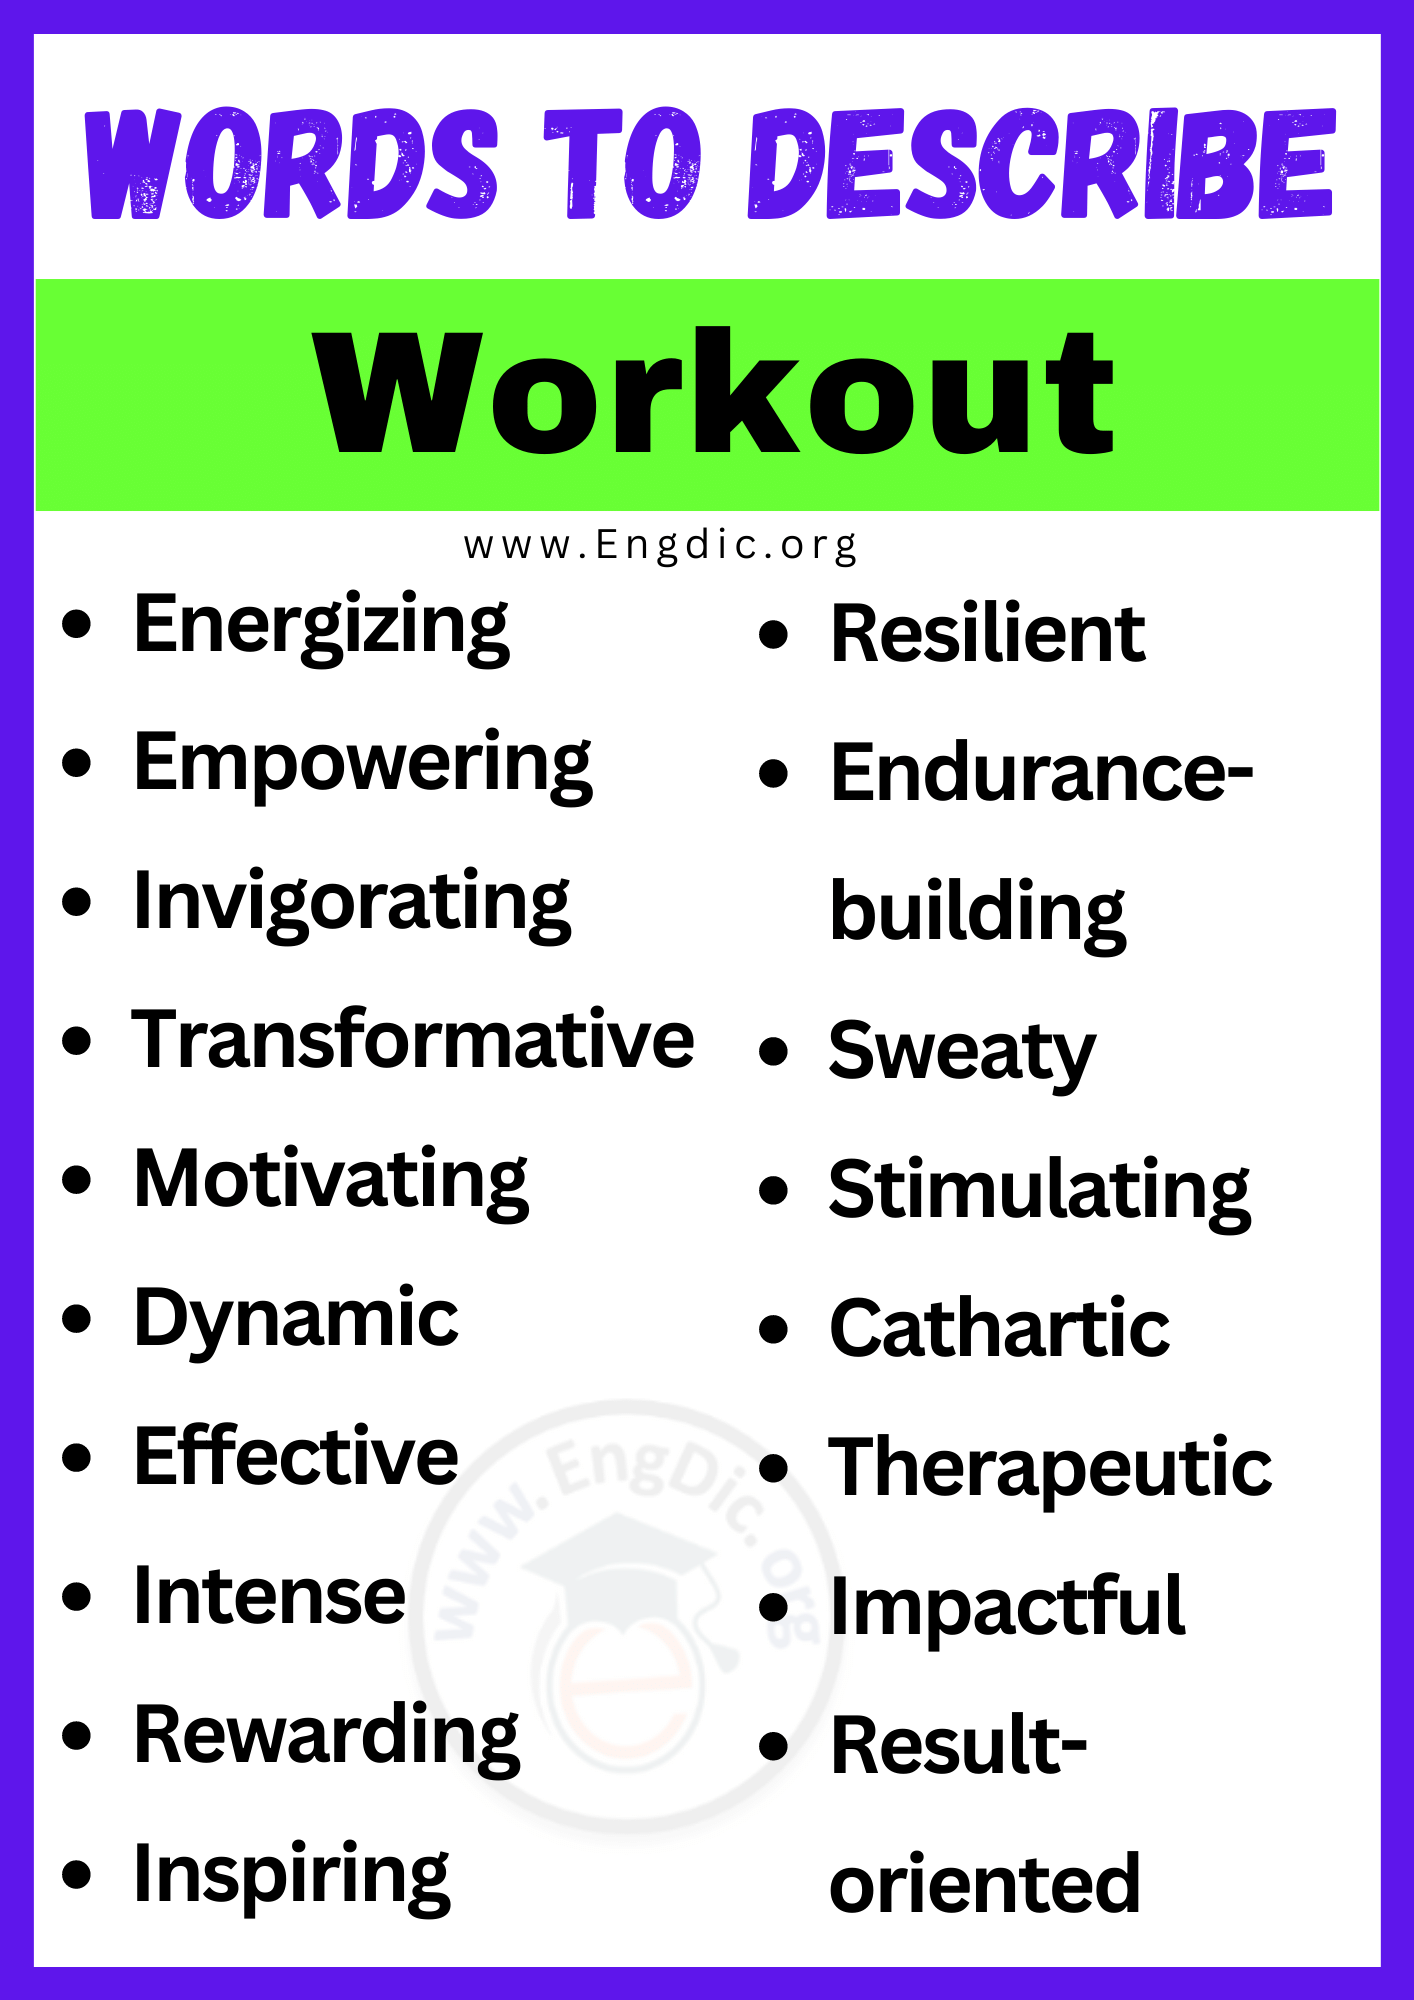 Words to Describe Workout